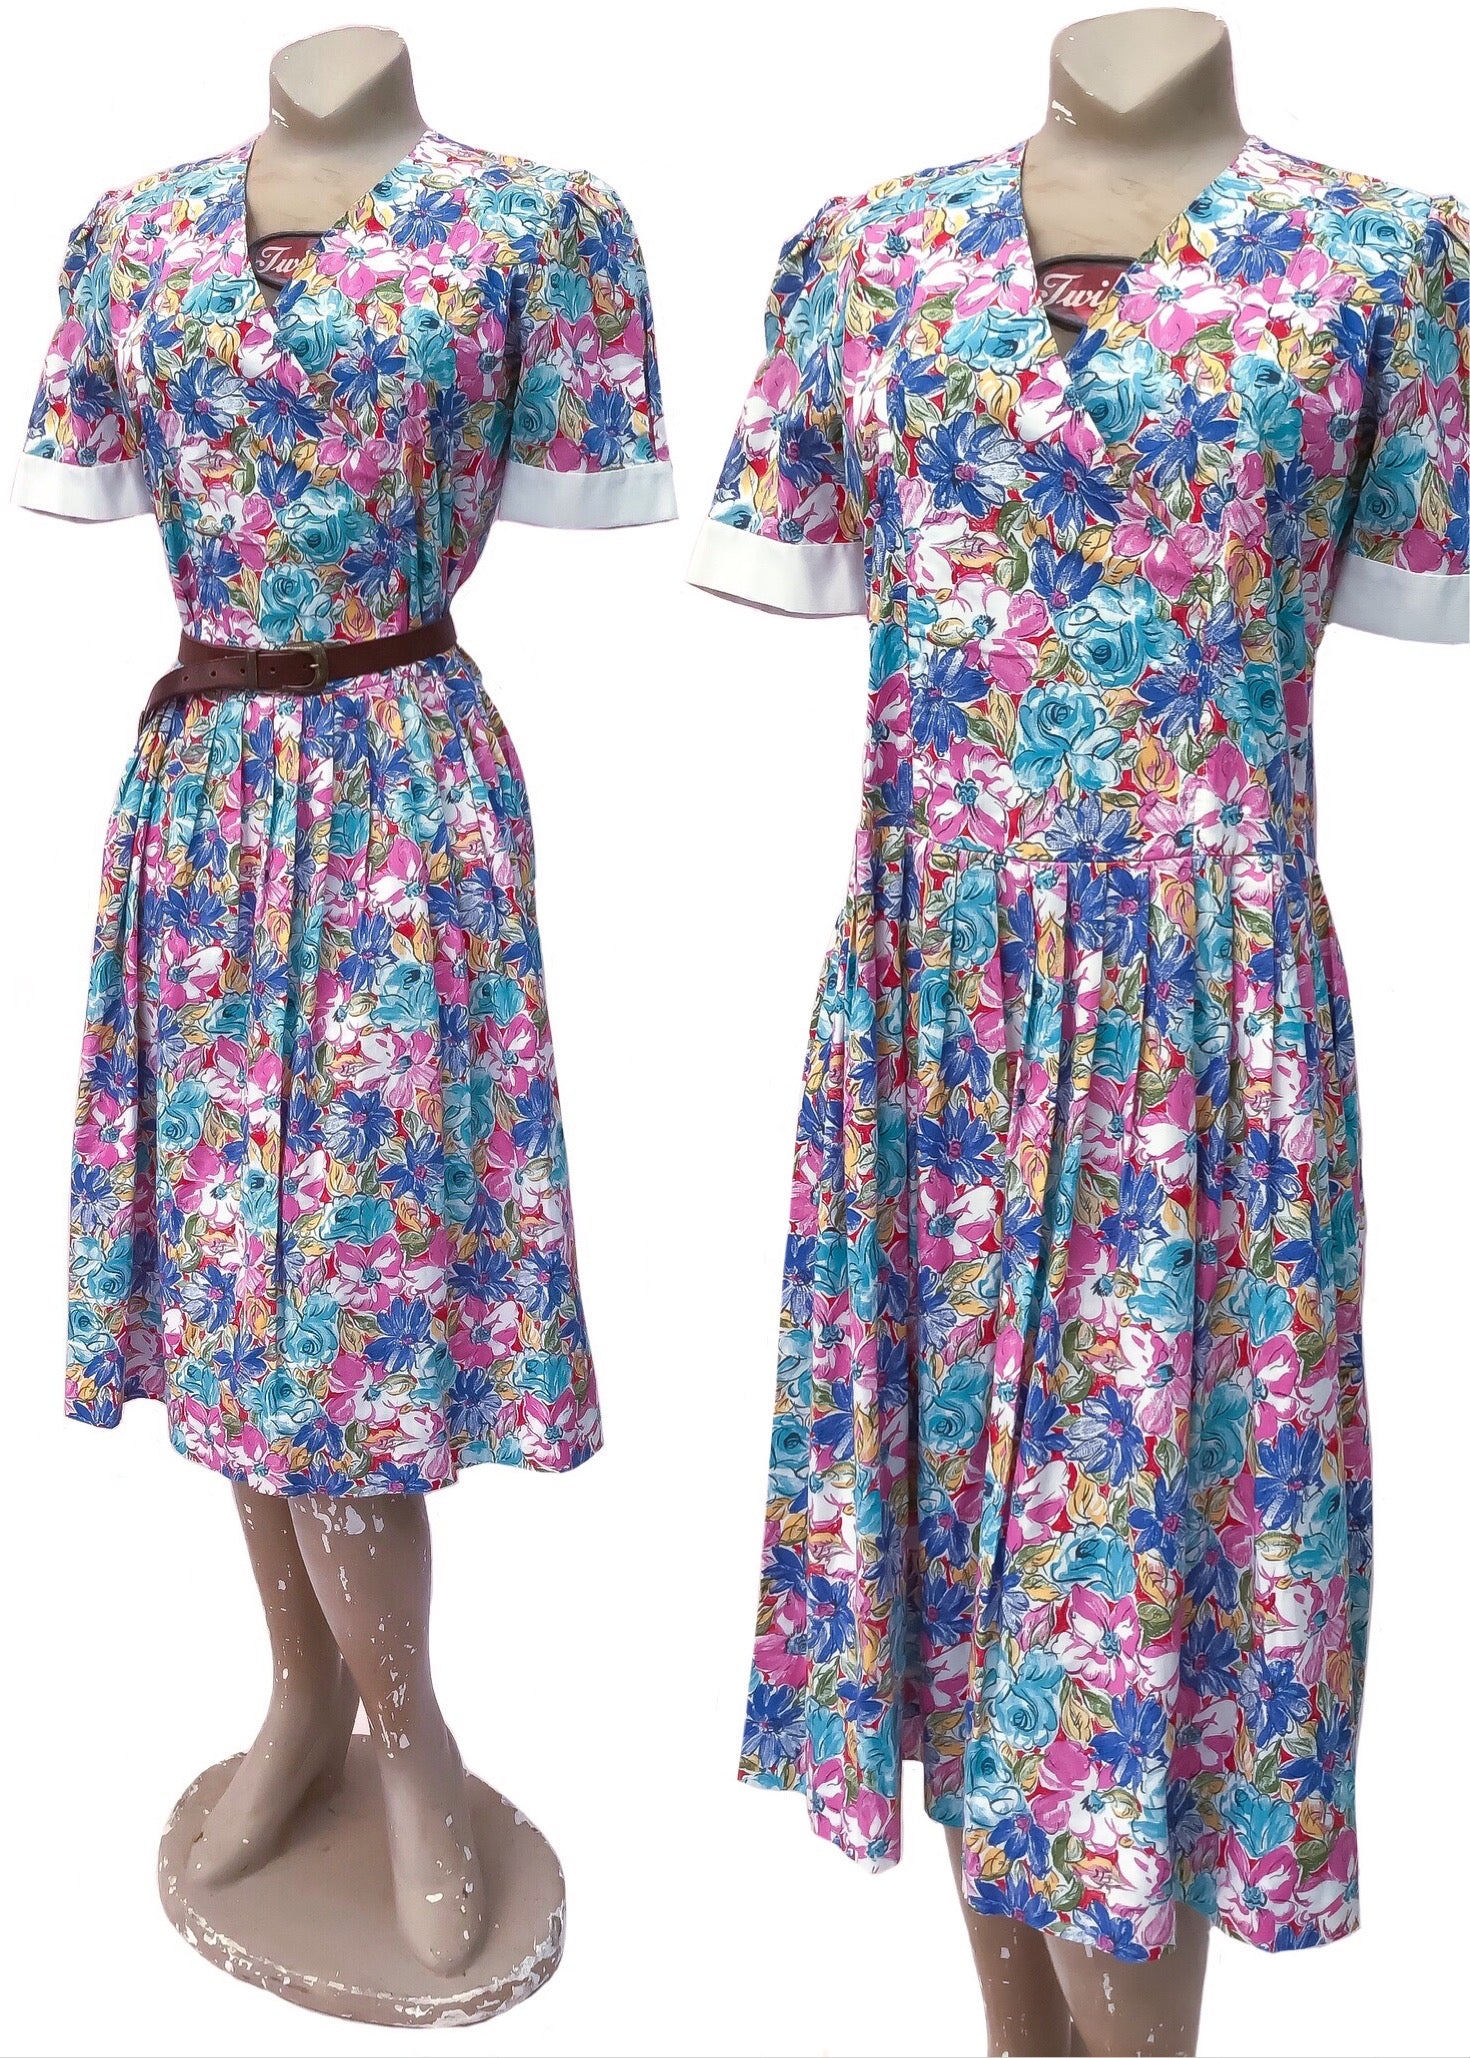 Handmade floral cotton drop waist dress from the 1980s, hand made and easy to wear.